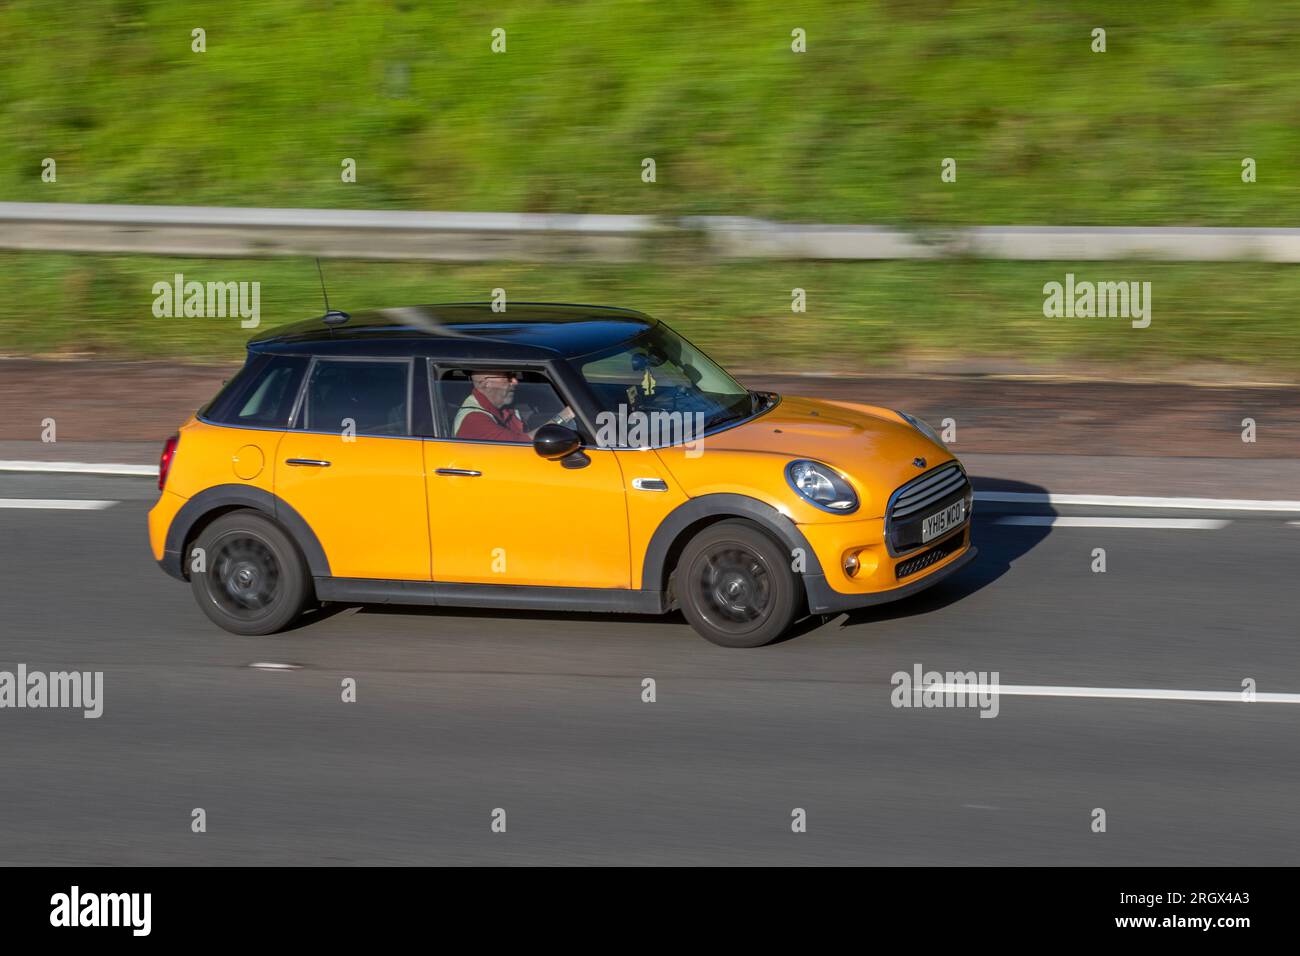 2015 Mini Cooper Auto Steptronic Auto Orange Car Hatchback PetroL 1499 cc, double-clutch 6d; travelling at speed on the M6 motorway in Greater Manchester, UK Stock Photo